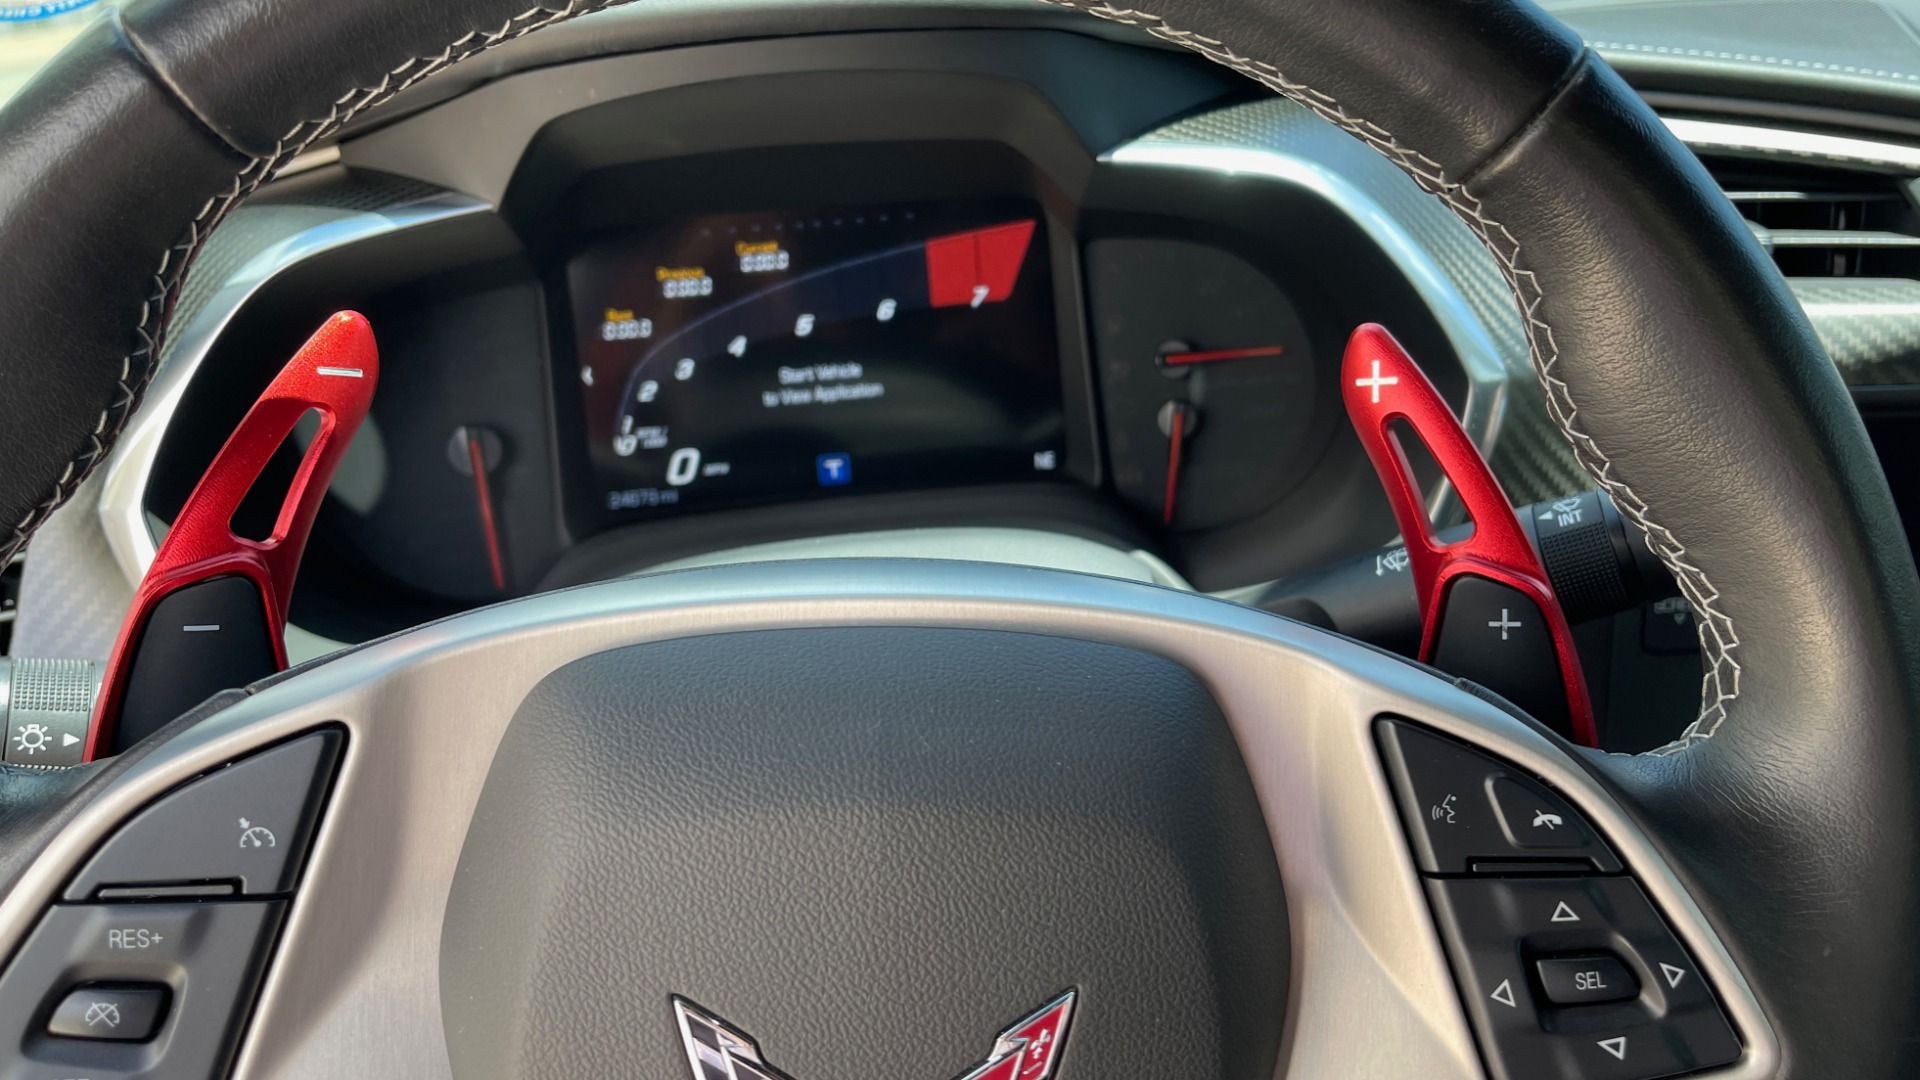 Used 2019 Chevrolet CORVETTE GRAND SPORT 3LT / SUPERCHARGED 6.2L V8 / NAV / REARVIEW for sale Sold at Formula Imports in Charlotte NC 28227 47